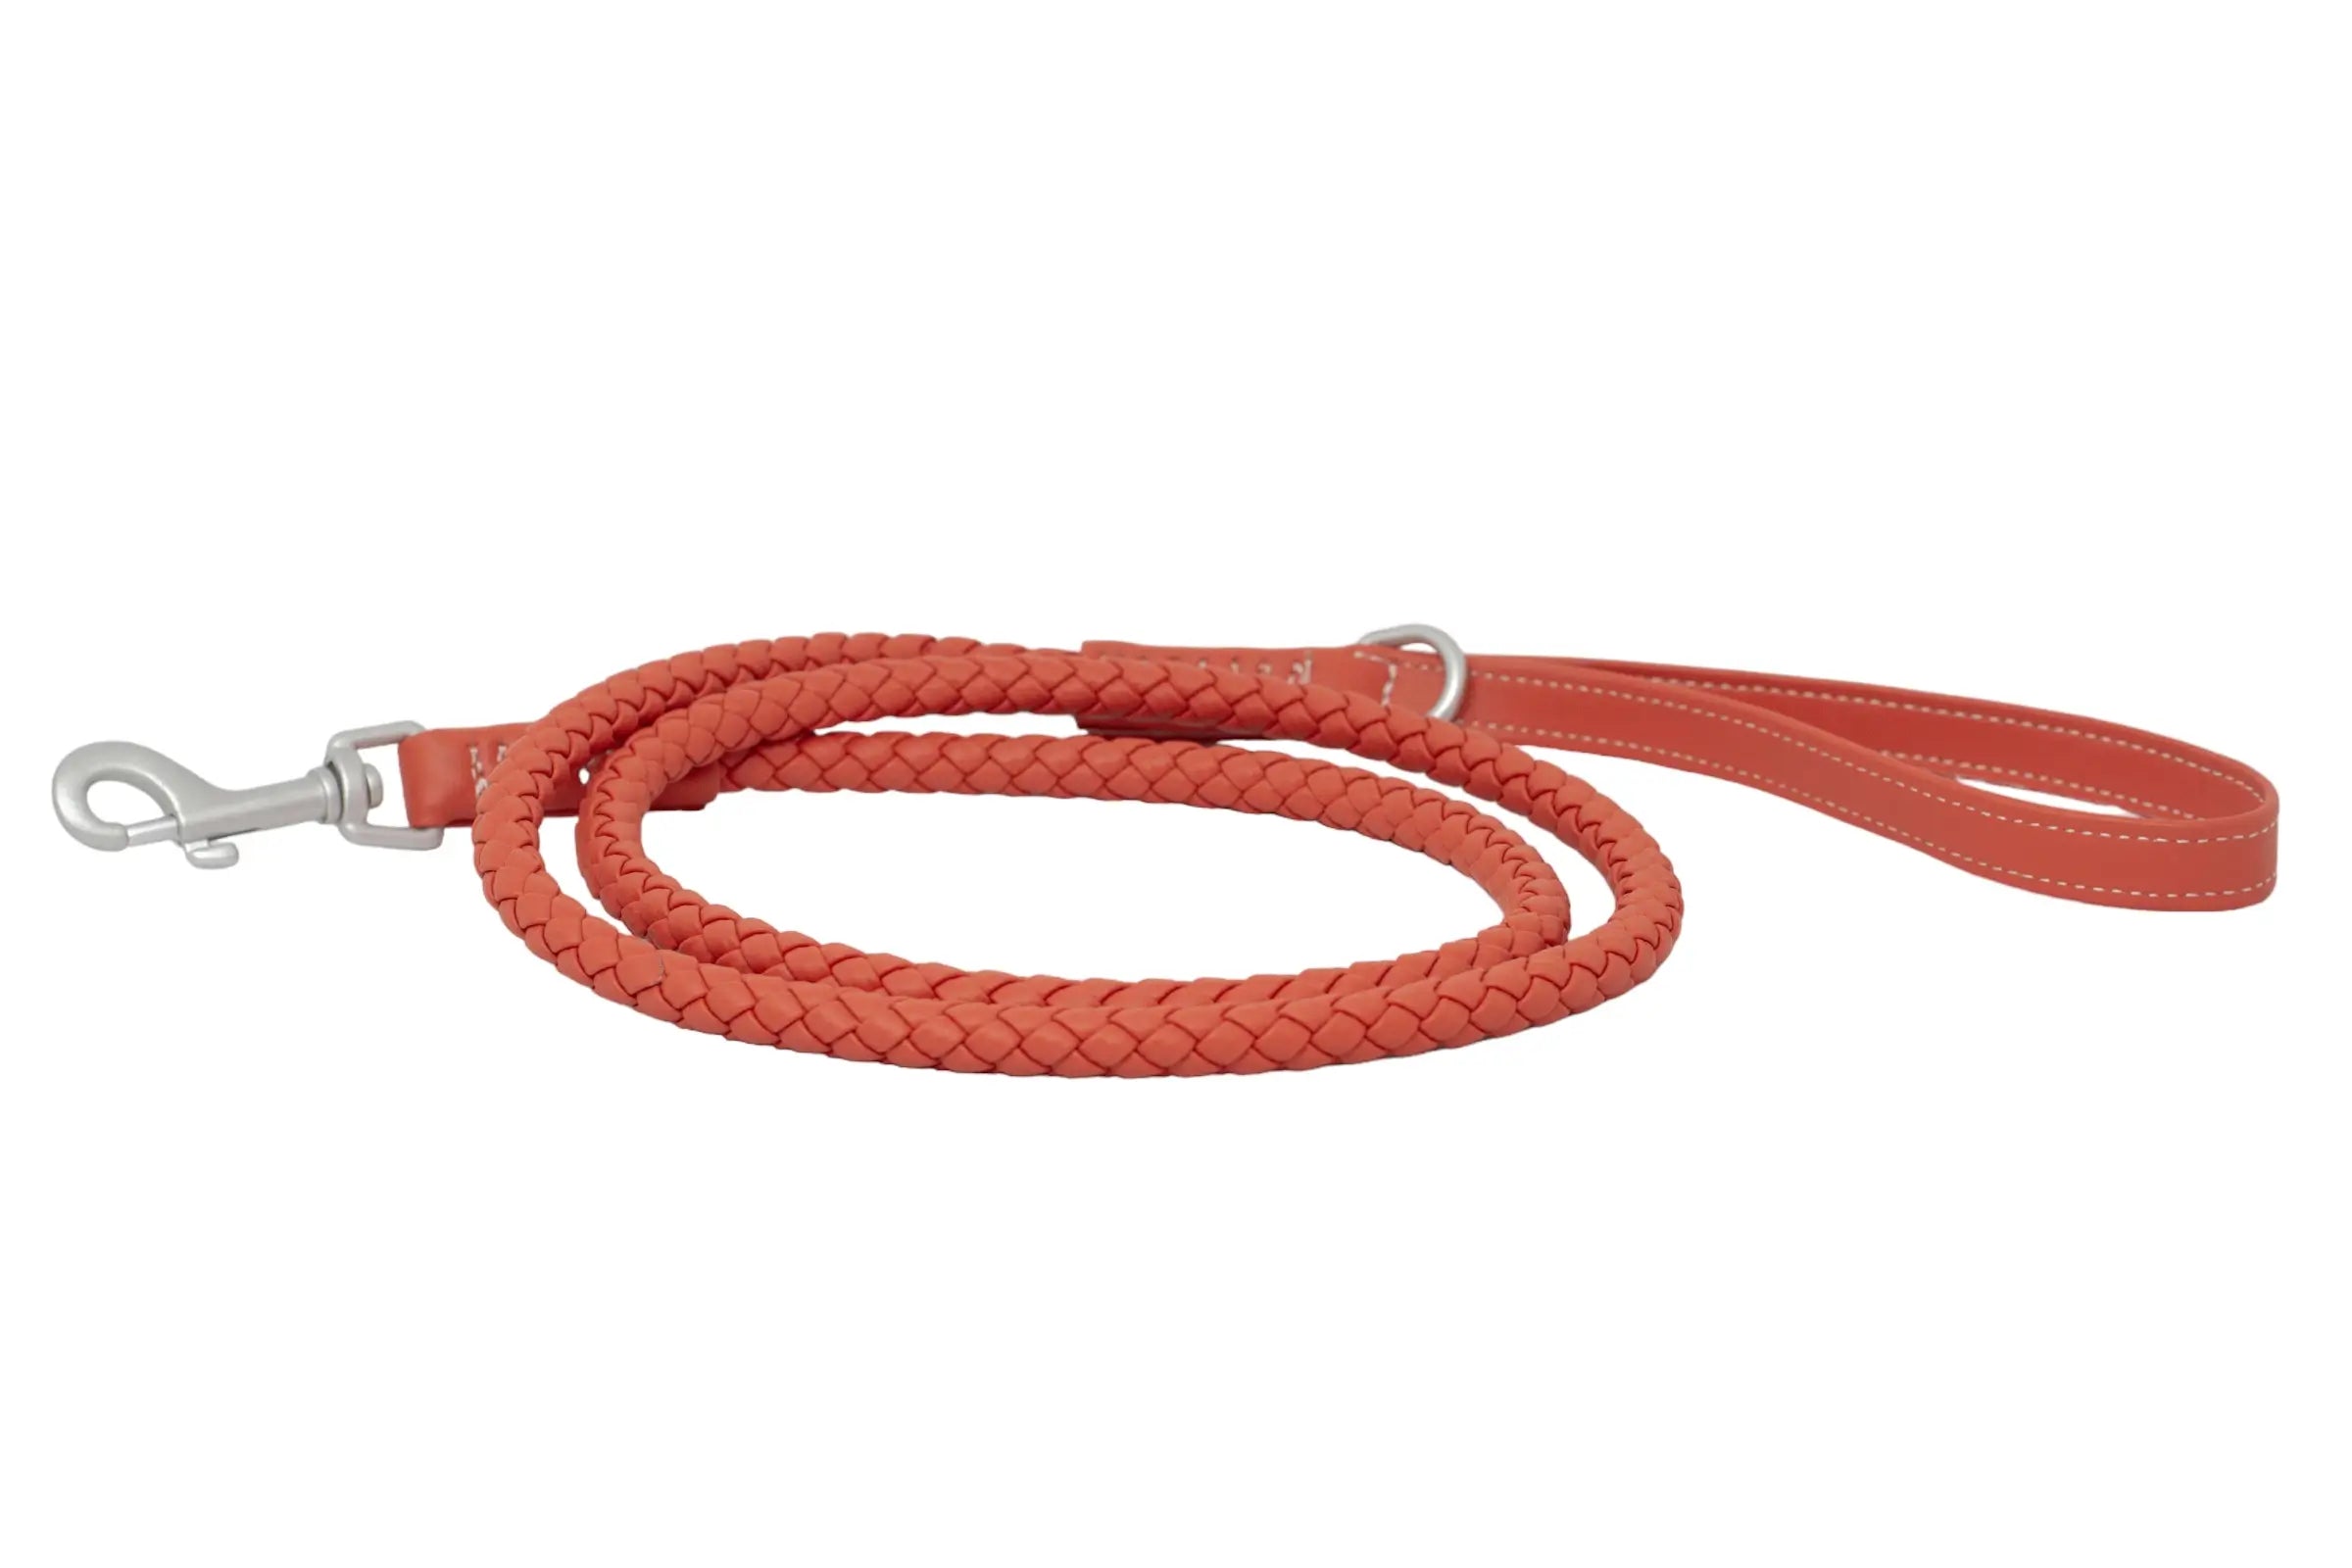 Close up of a waterproof and durable dog leash with marine grade anodized aluminum hardware in the color strawberry.